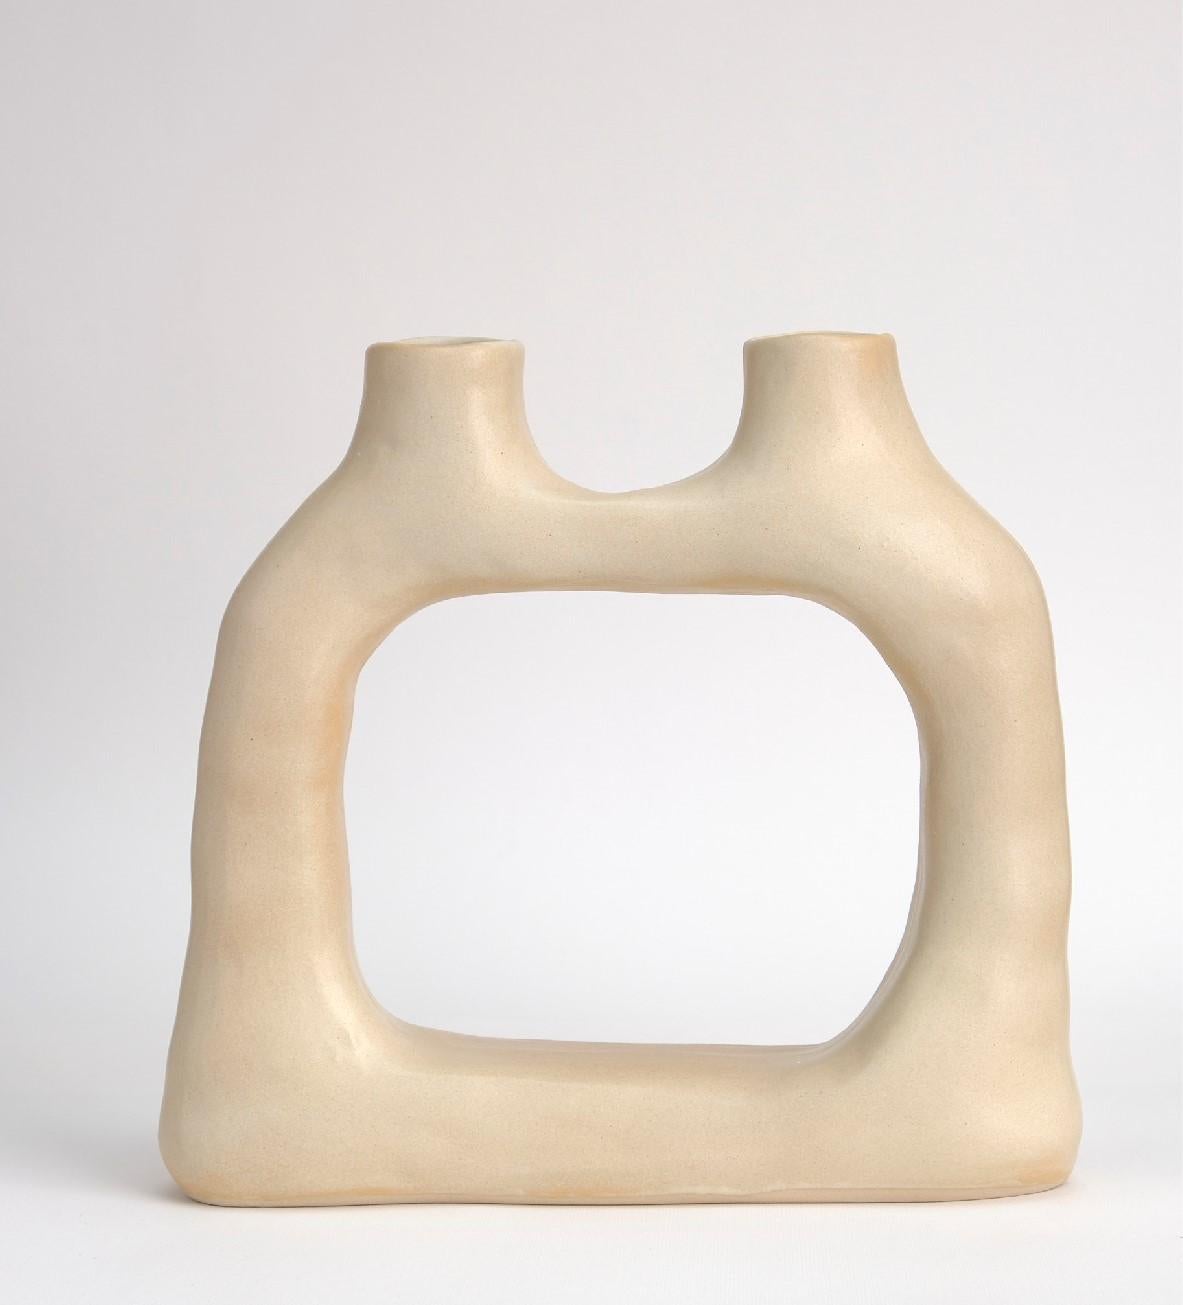 Buttermilk dual No.2 stoneware vase by Camila Apaez
One of a kind
Materials: Stoneware
Dimensions: 23 x 8 x 19 cm 
Options: white bone, butter milk, charcoal black

This year has been shaped by the topographies of our homes and the uncertainty